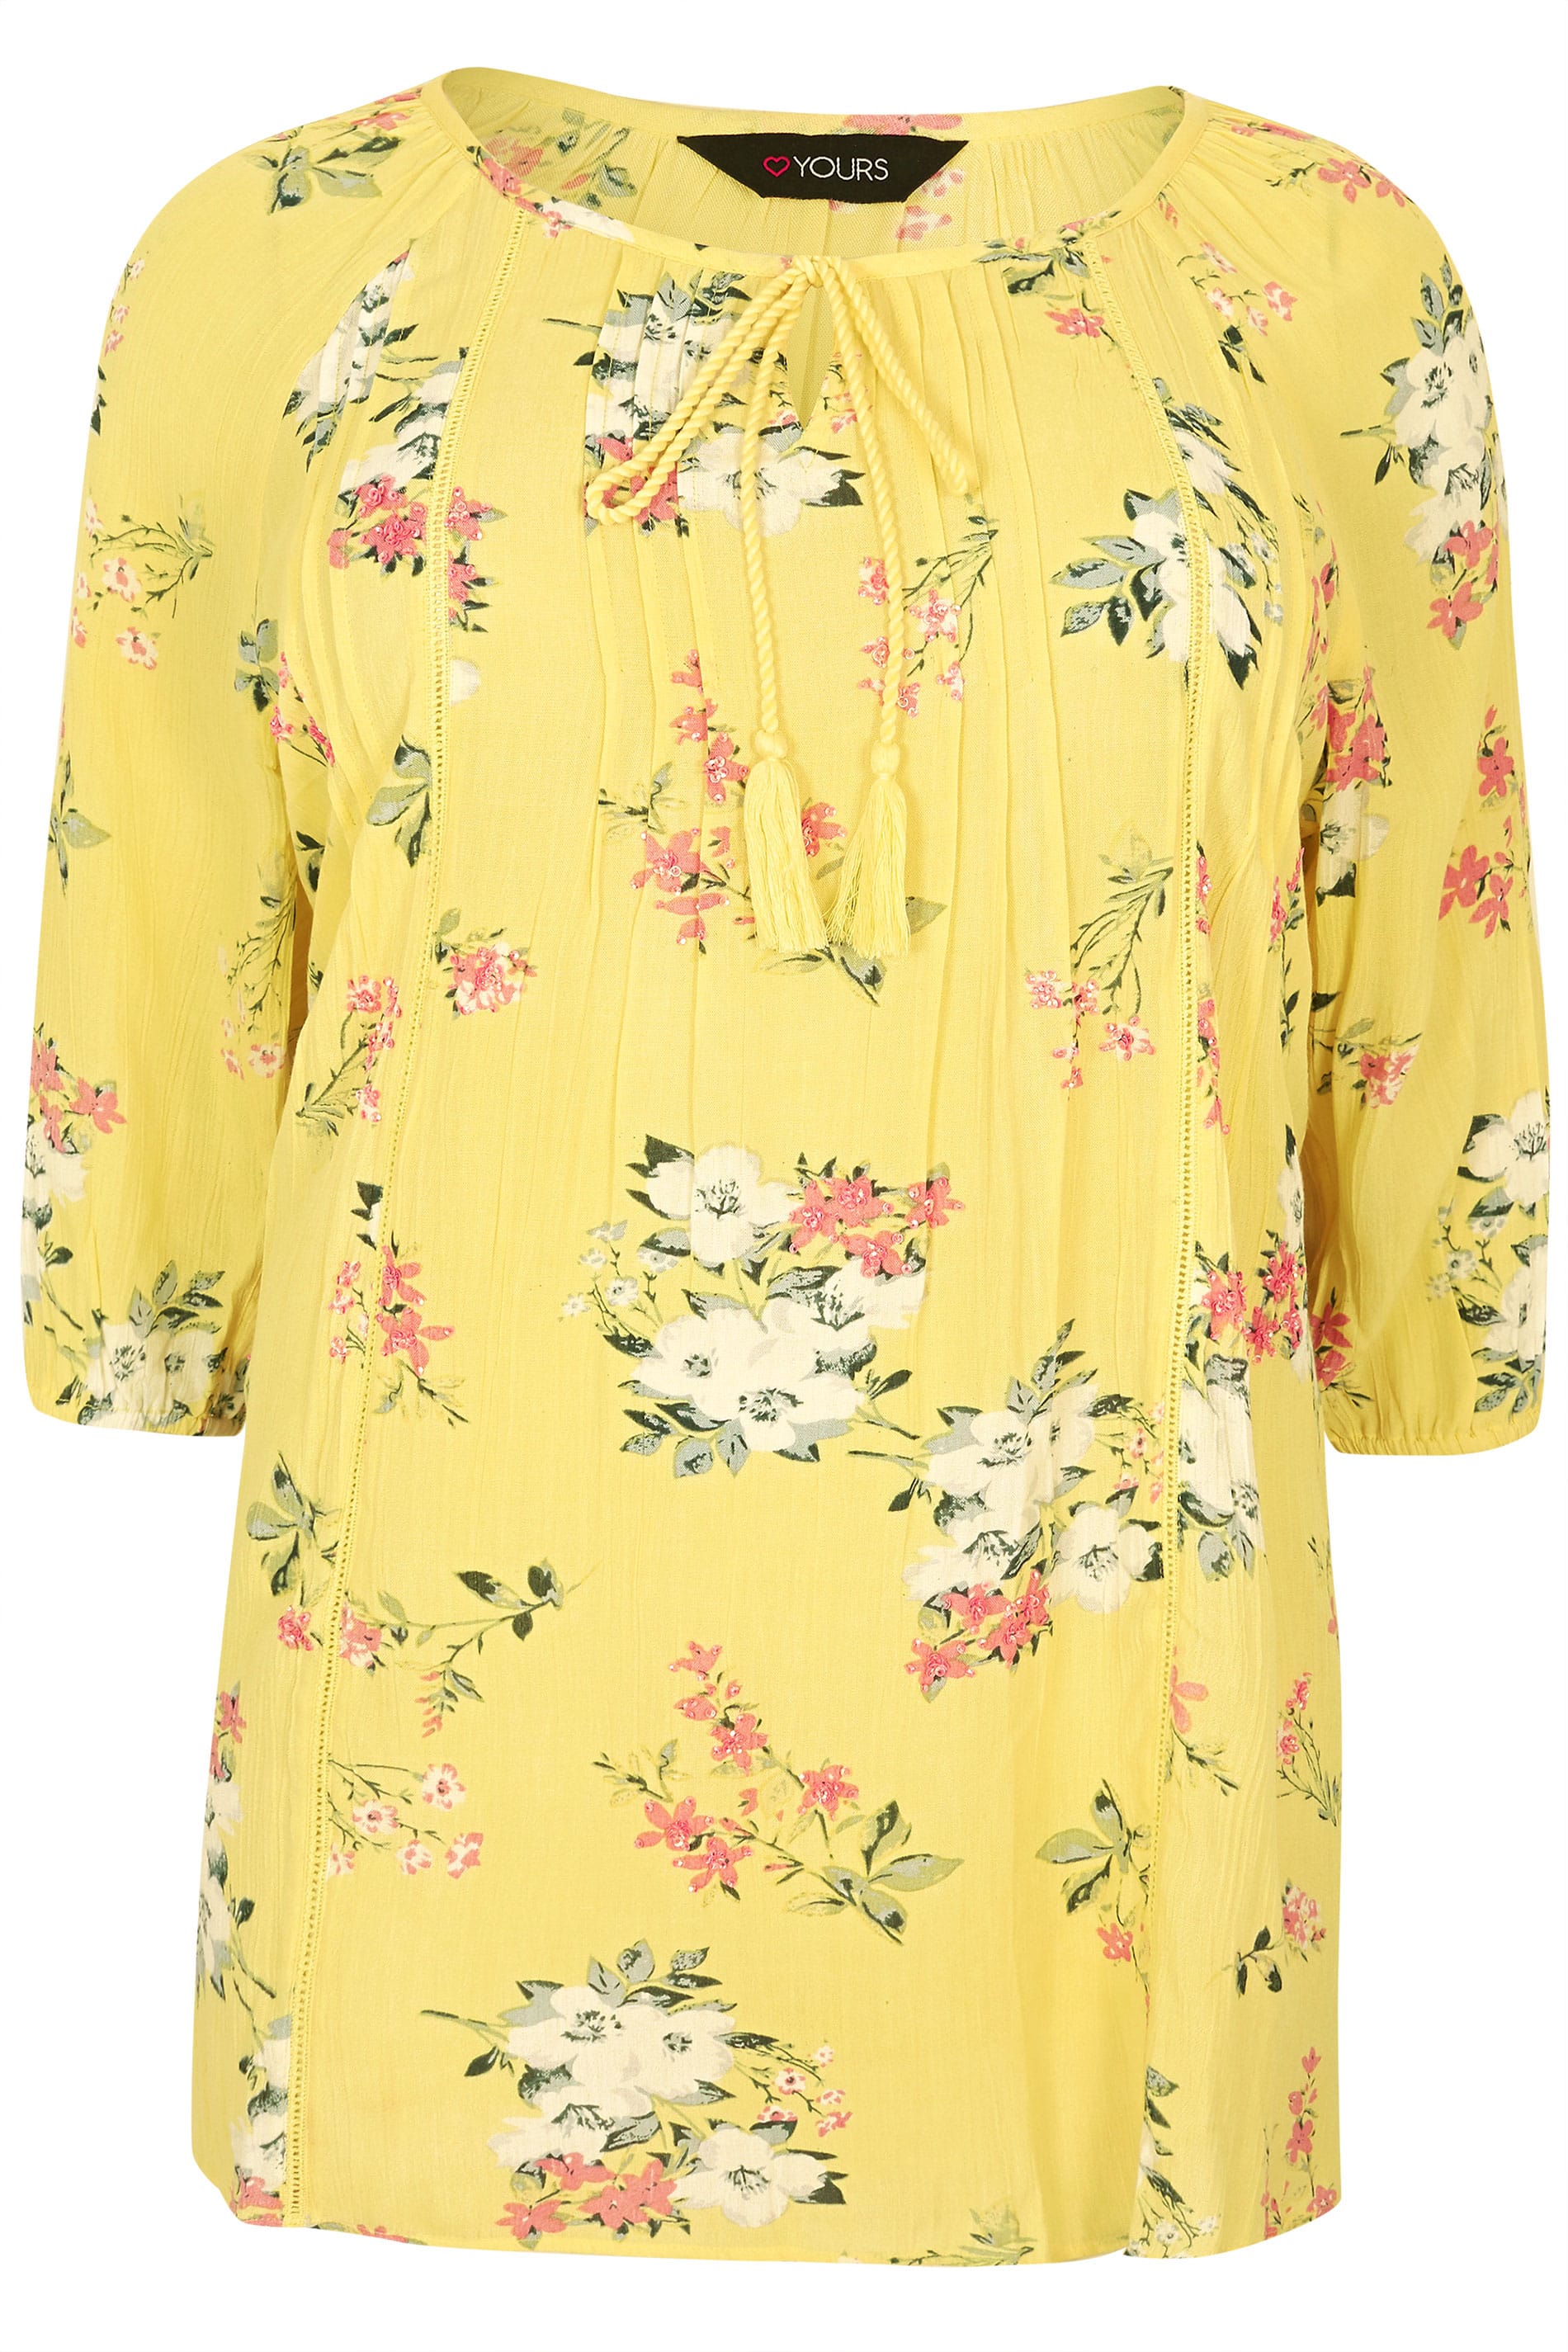 Plus Size Yellow Floral Gypsy Top Sizes 16 To 36 Yours | Free Download ...